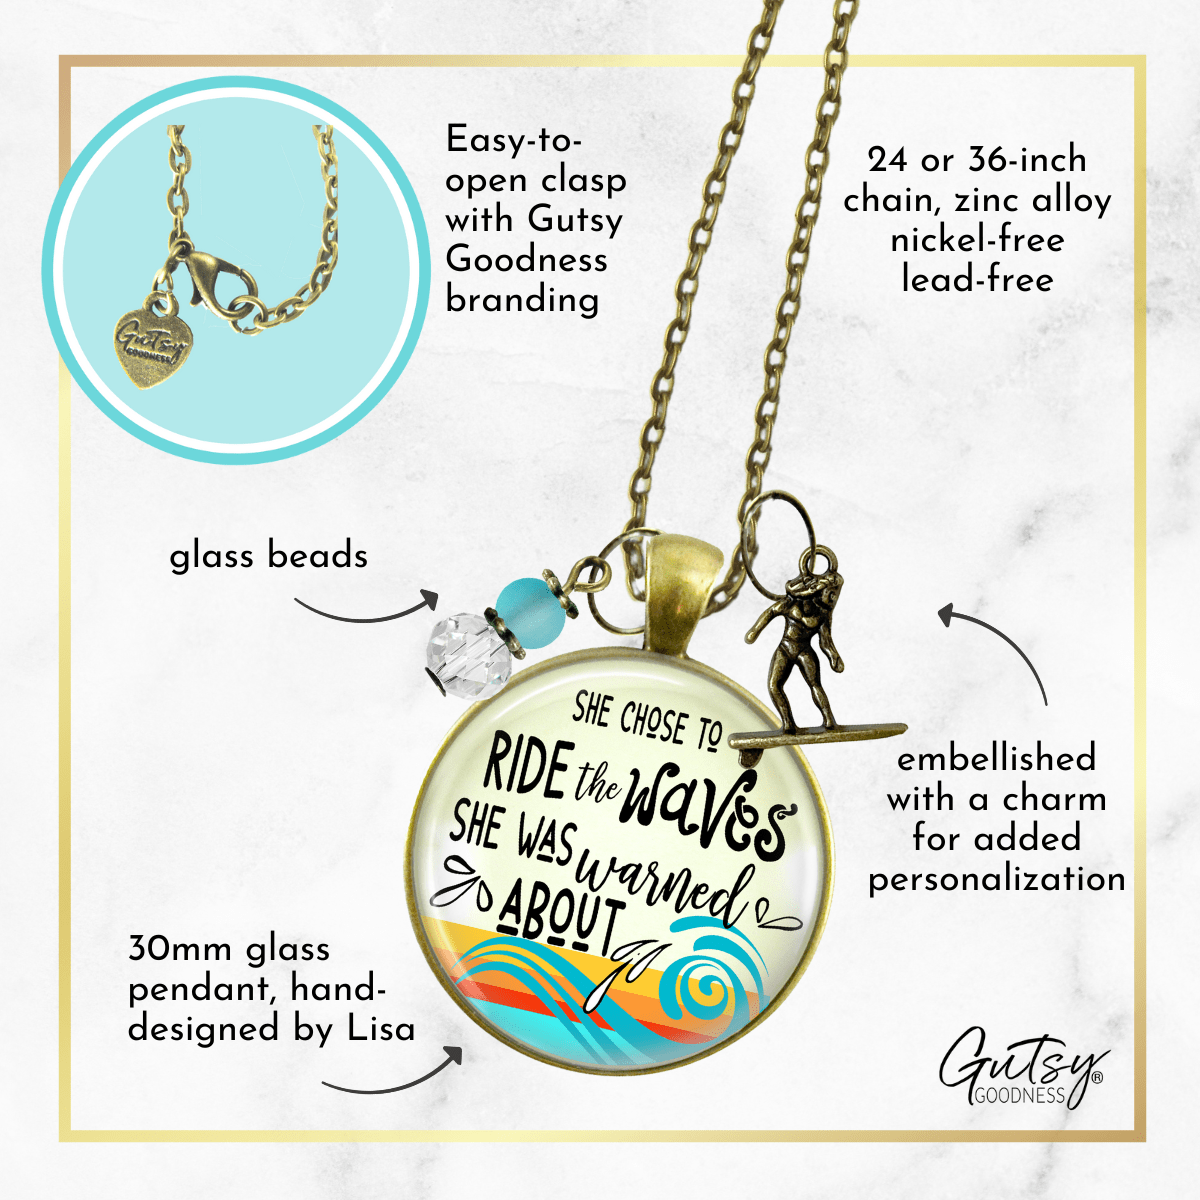 Surfer Girl Necklace She Rides Waves They Warn Her About Motivation Life Mantra Sea Glass Style Charm  Necklace - Gutsy Goodness Handmade Jewelry